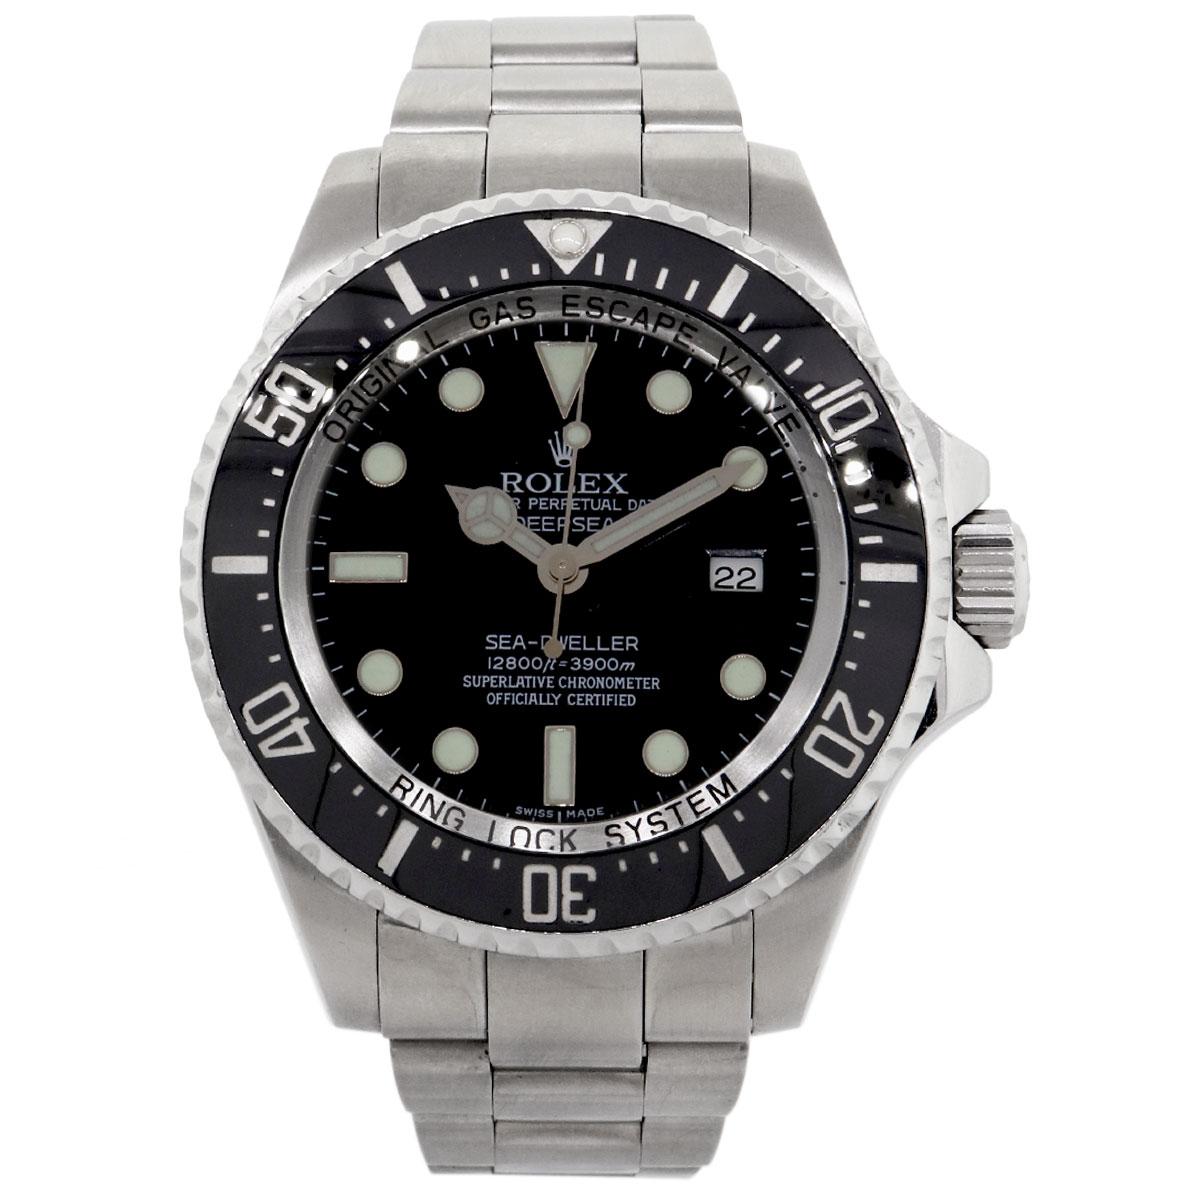 Brand: Rolex
MPN: 116660
Model: Deepsea Sea-Dweller
Case Material: Stainless steel
Case Diameter: 44mm
Crystal: Scratch resistant sapphire
Bezel: Black ceramic unidirectional bezel
Dial: Black dial with date window at the 3 o’clock